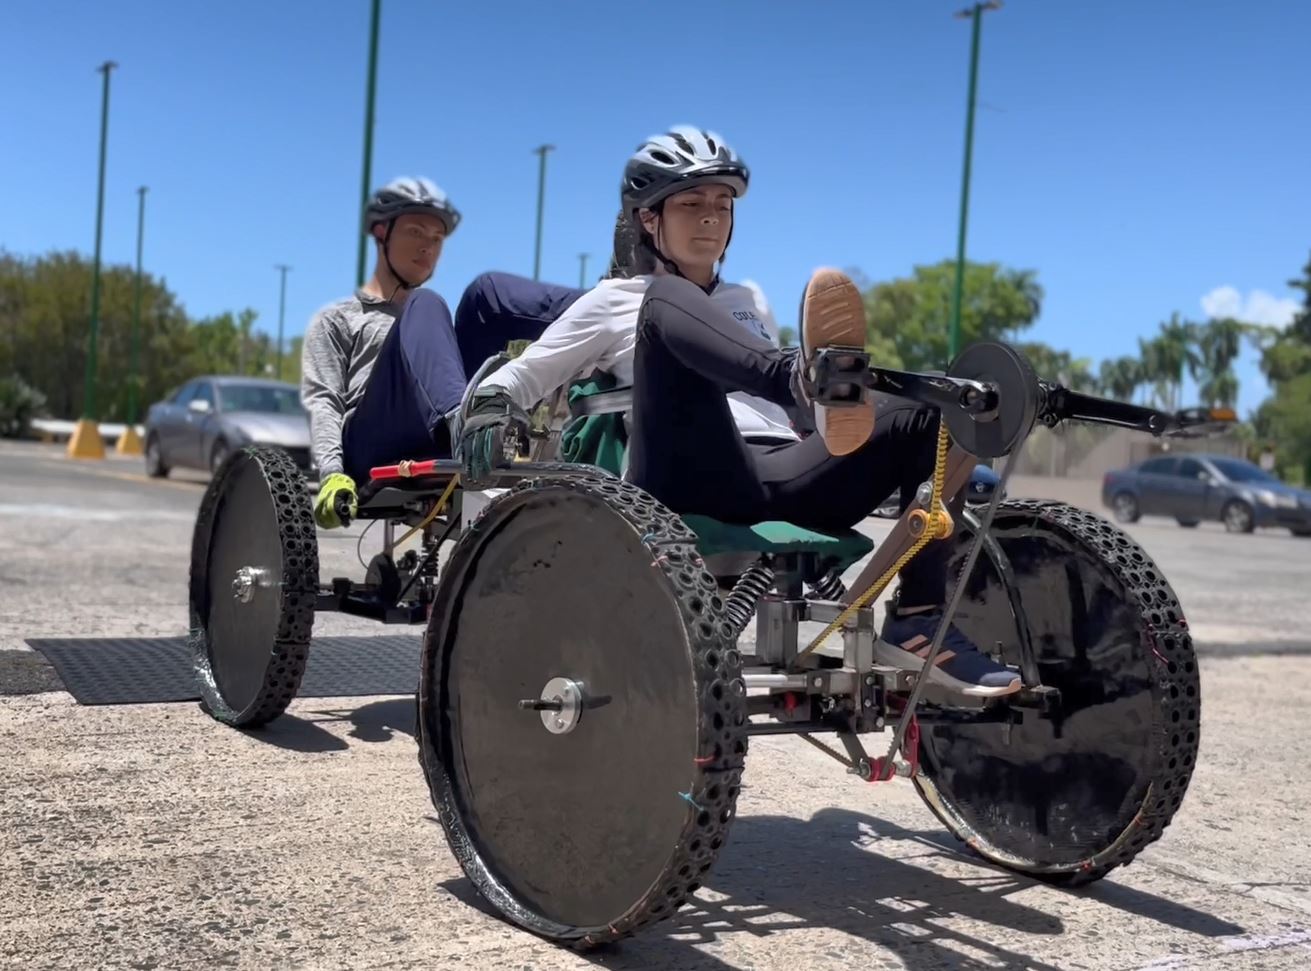 University of Puerto Rico, Mayaguez team members try out their rover designed for NASA’s 2022 Human Exploration Rover Challenge. 